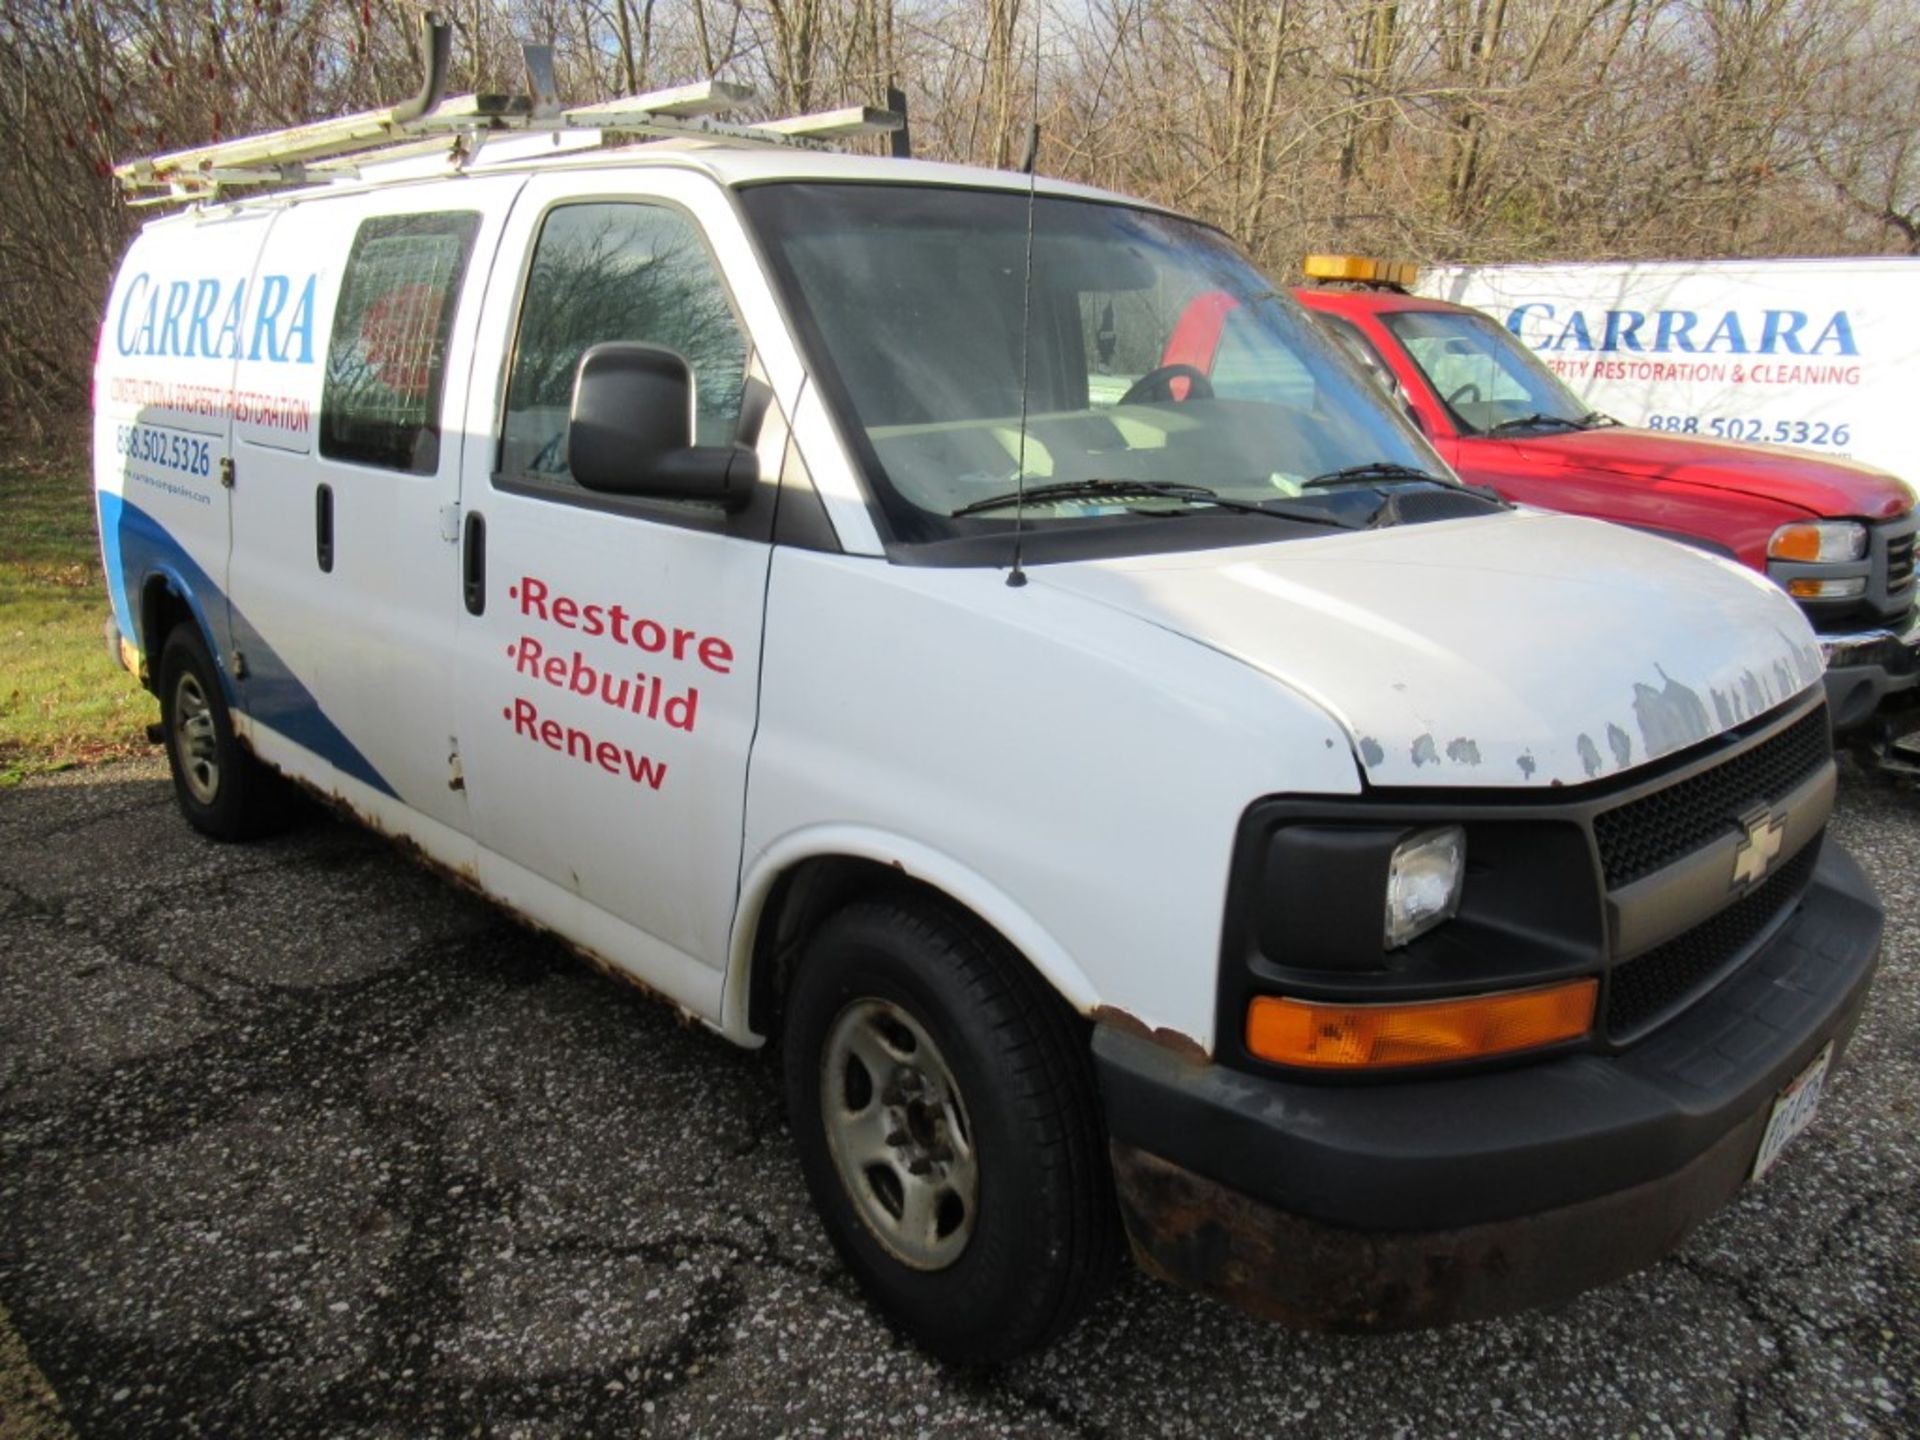 2005 Chevrolet Express Cargo Van, VIN 1GCFG15X651257294, Automatic, AC, AM/FM, Towing, Cracked - Image 4 of 33